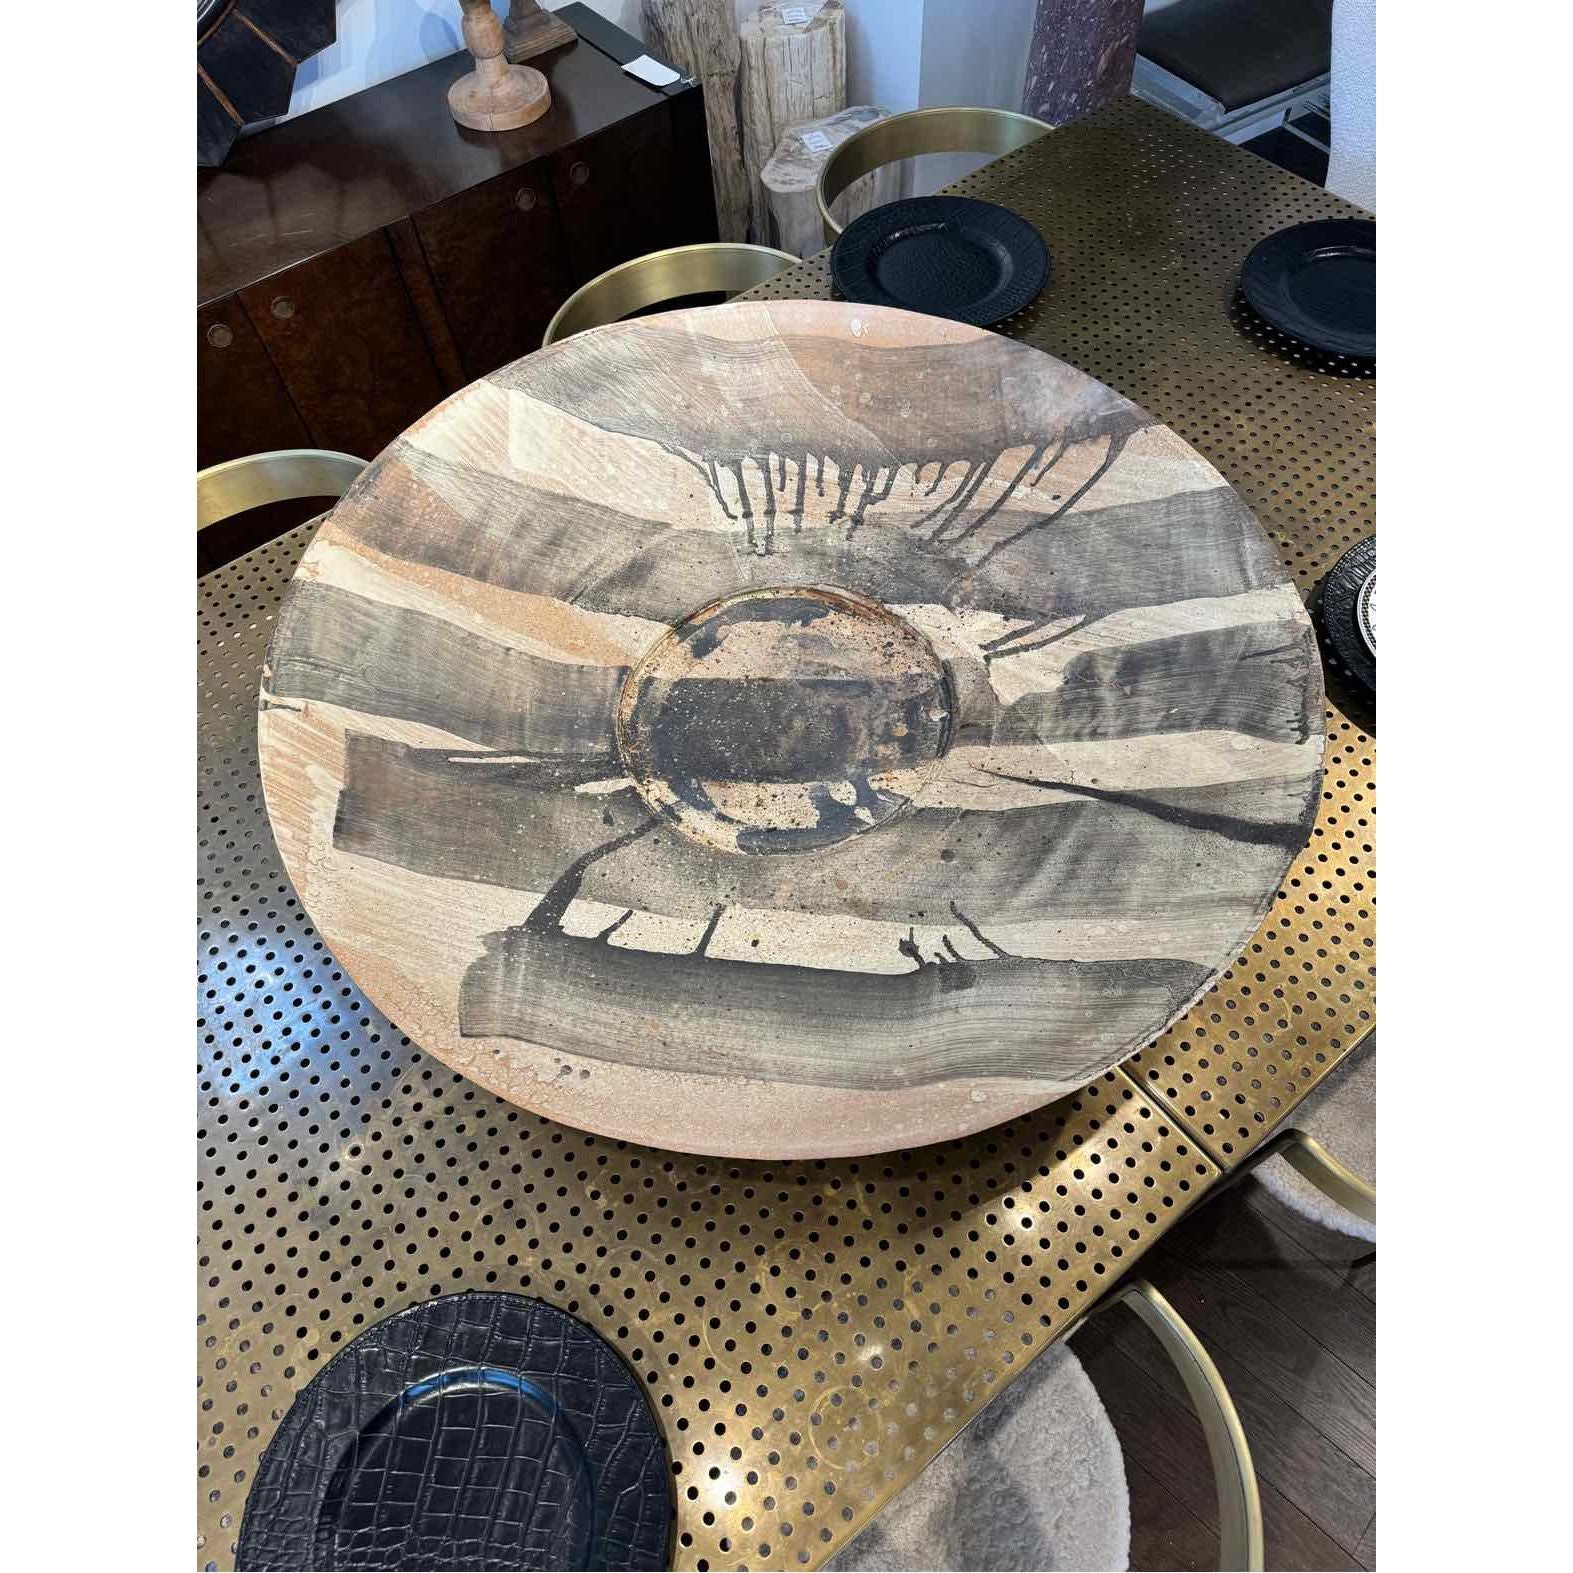 Large Ceramic Art Bowl on Table or Wall